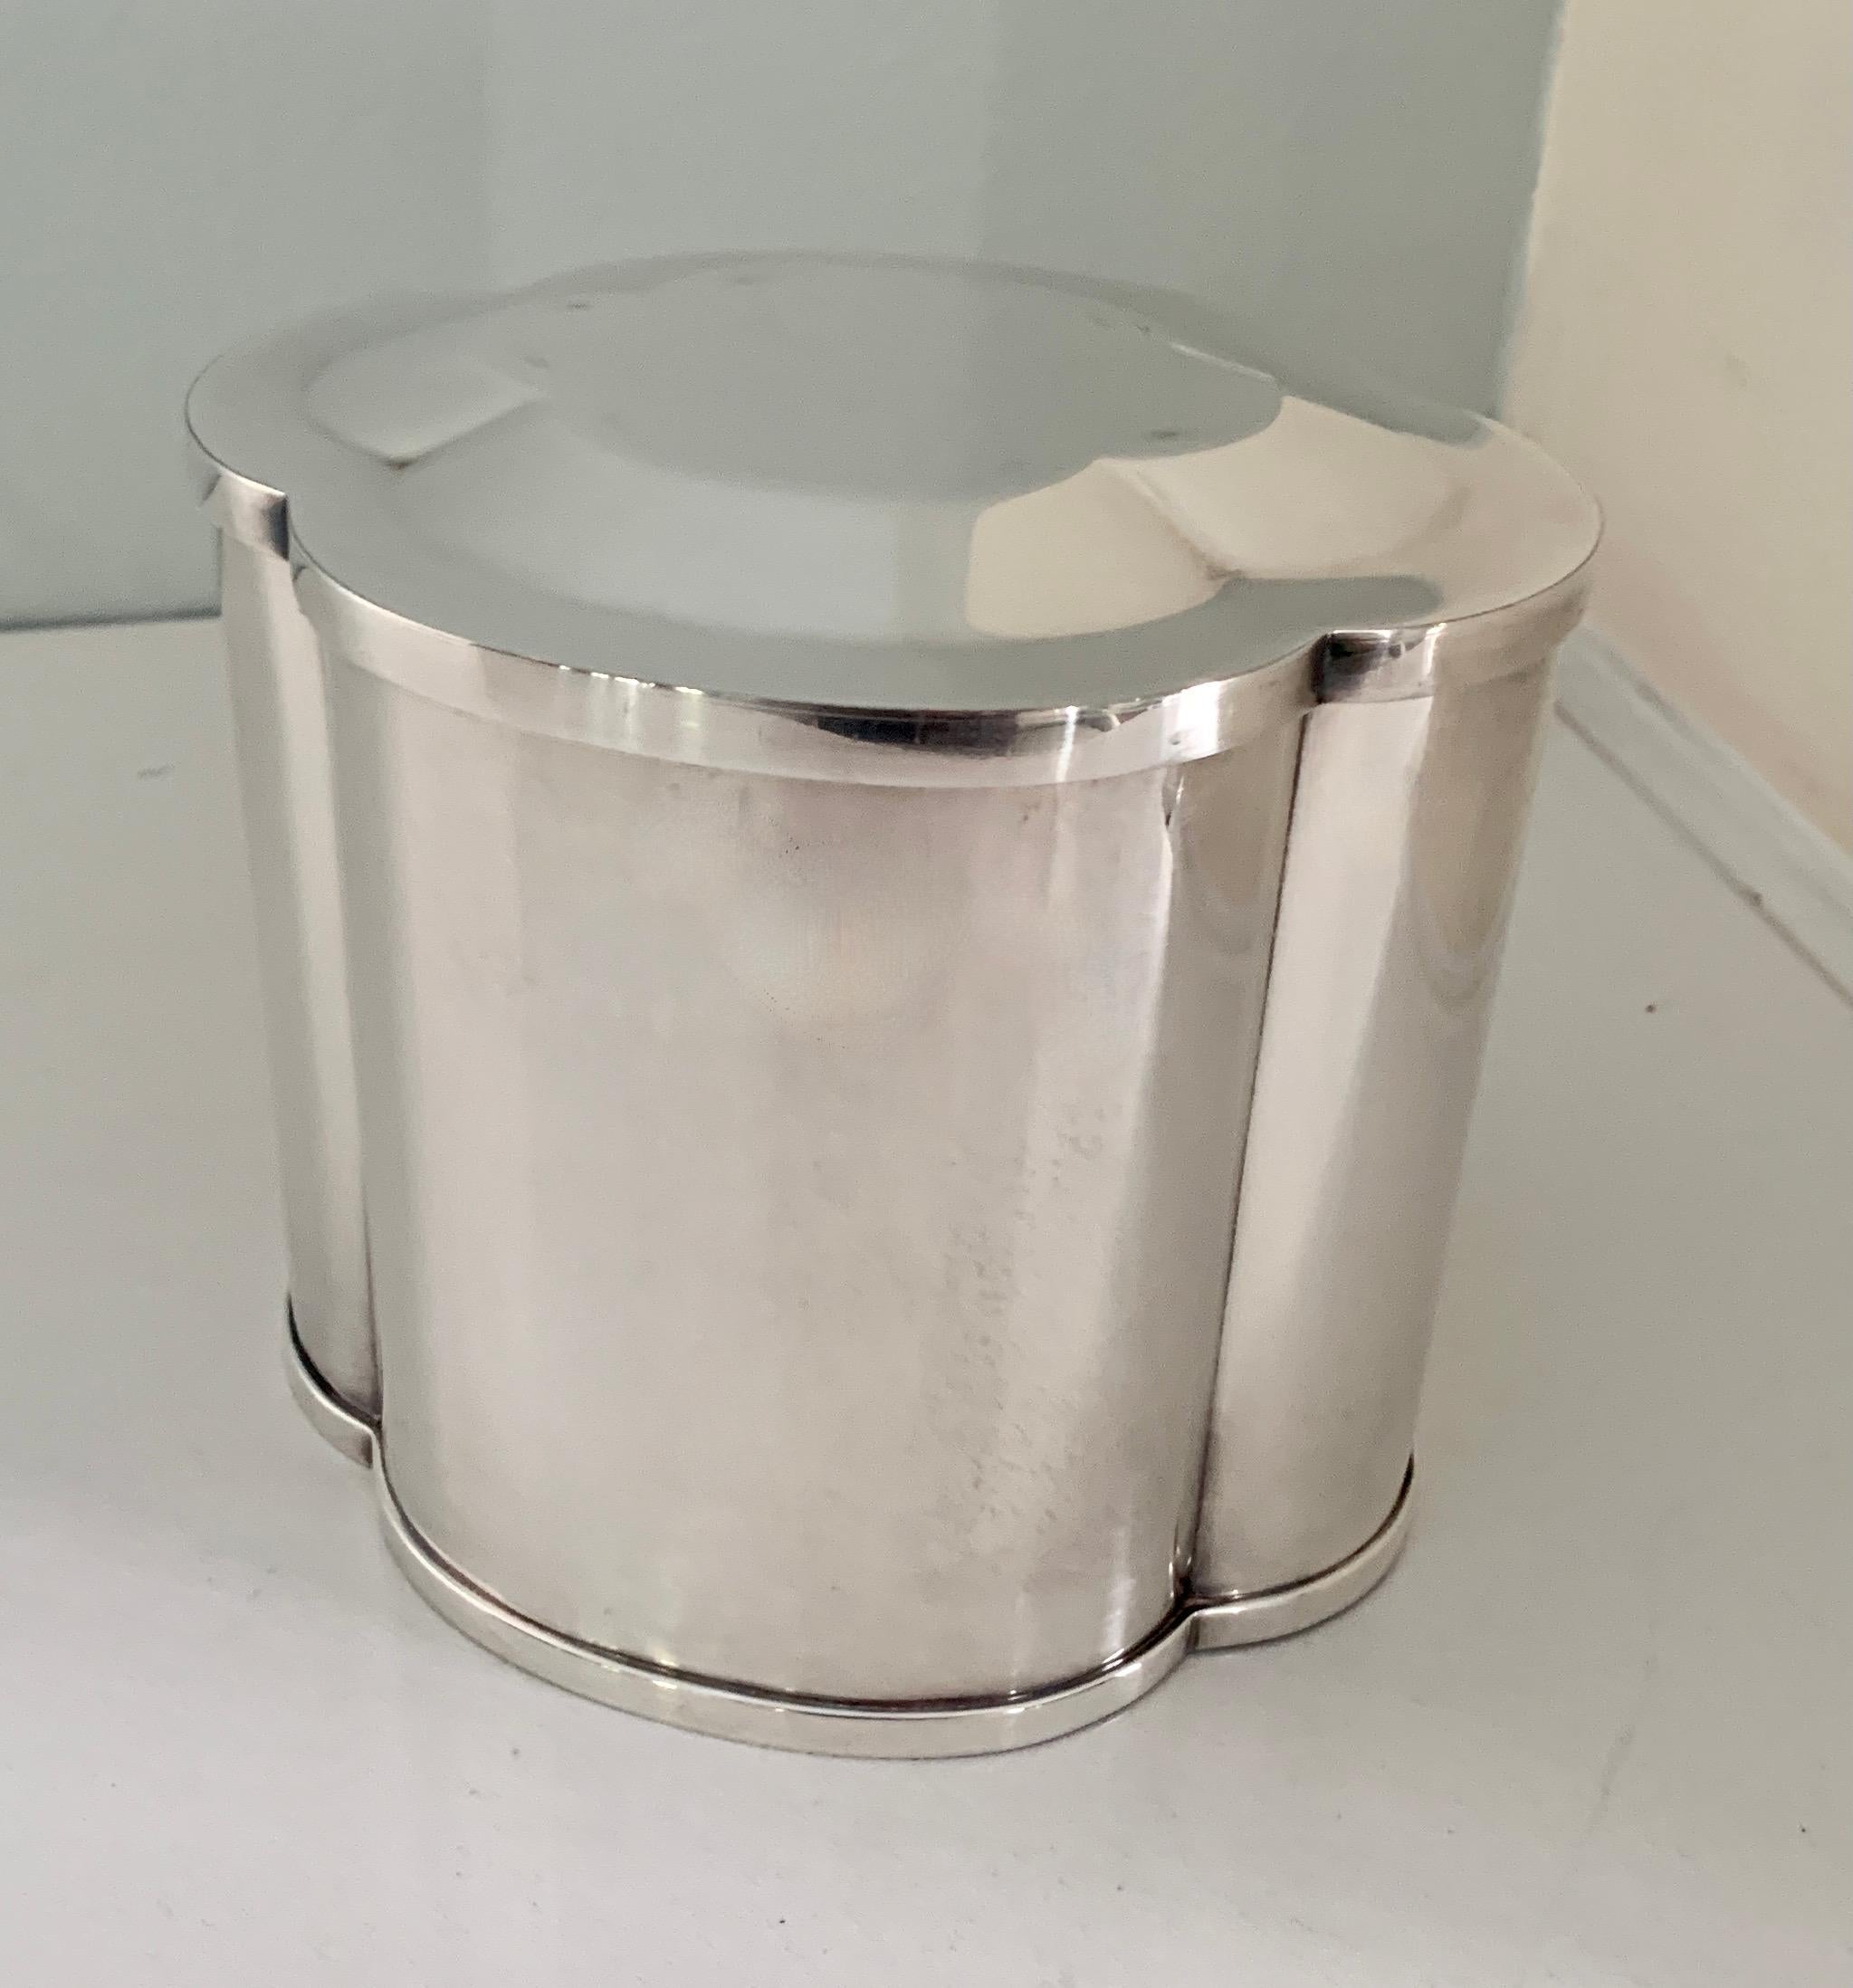 Silver Quatrefoil Brazilian tea caddy - A wonderful caddy, simple and straightforward, with a Silver Quatrefoil design. The lid fits snug and, due to the Elegant, yet plain lines, this piece compliments any decor, from traditional to ultra modern.